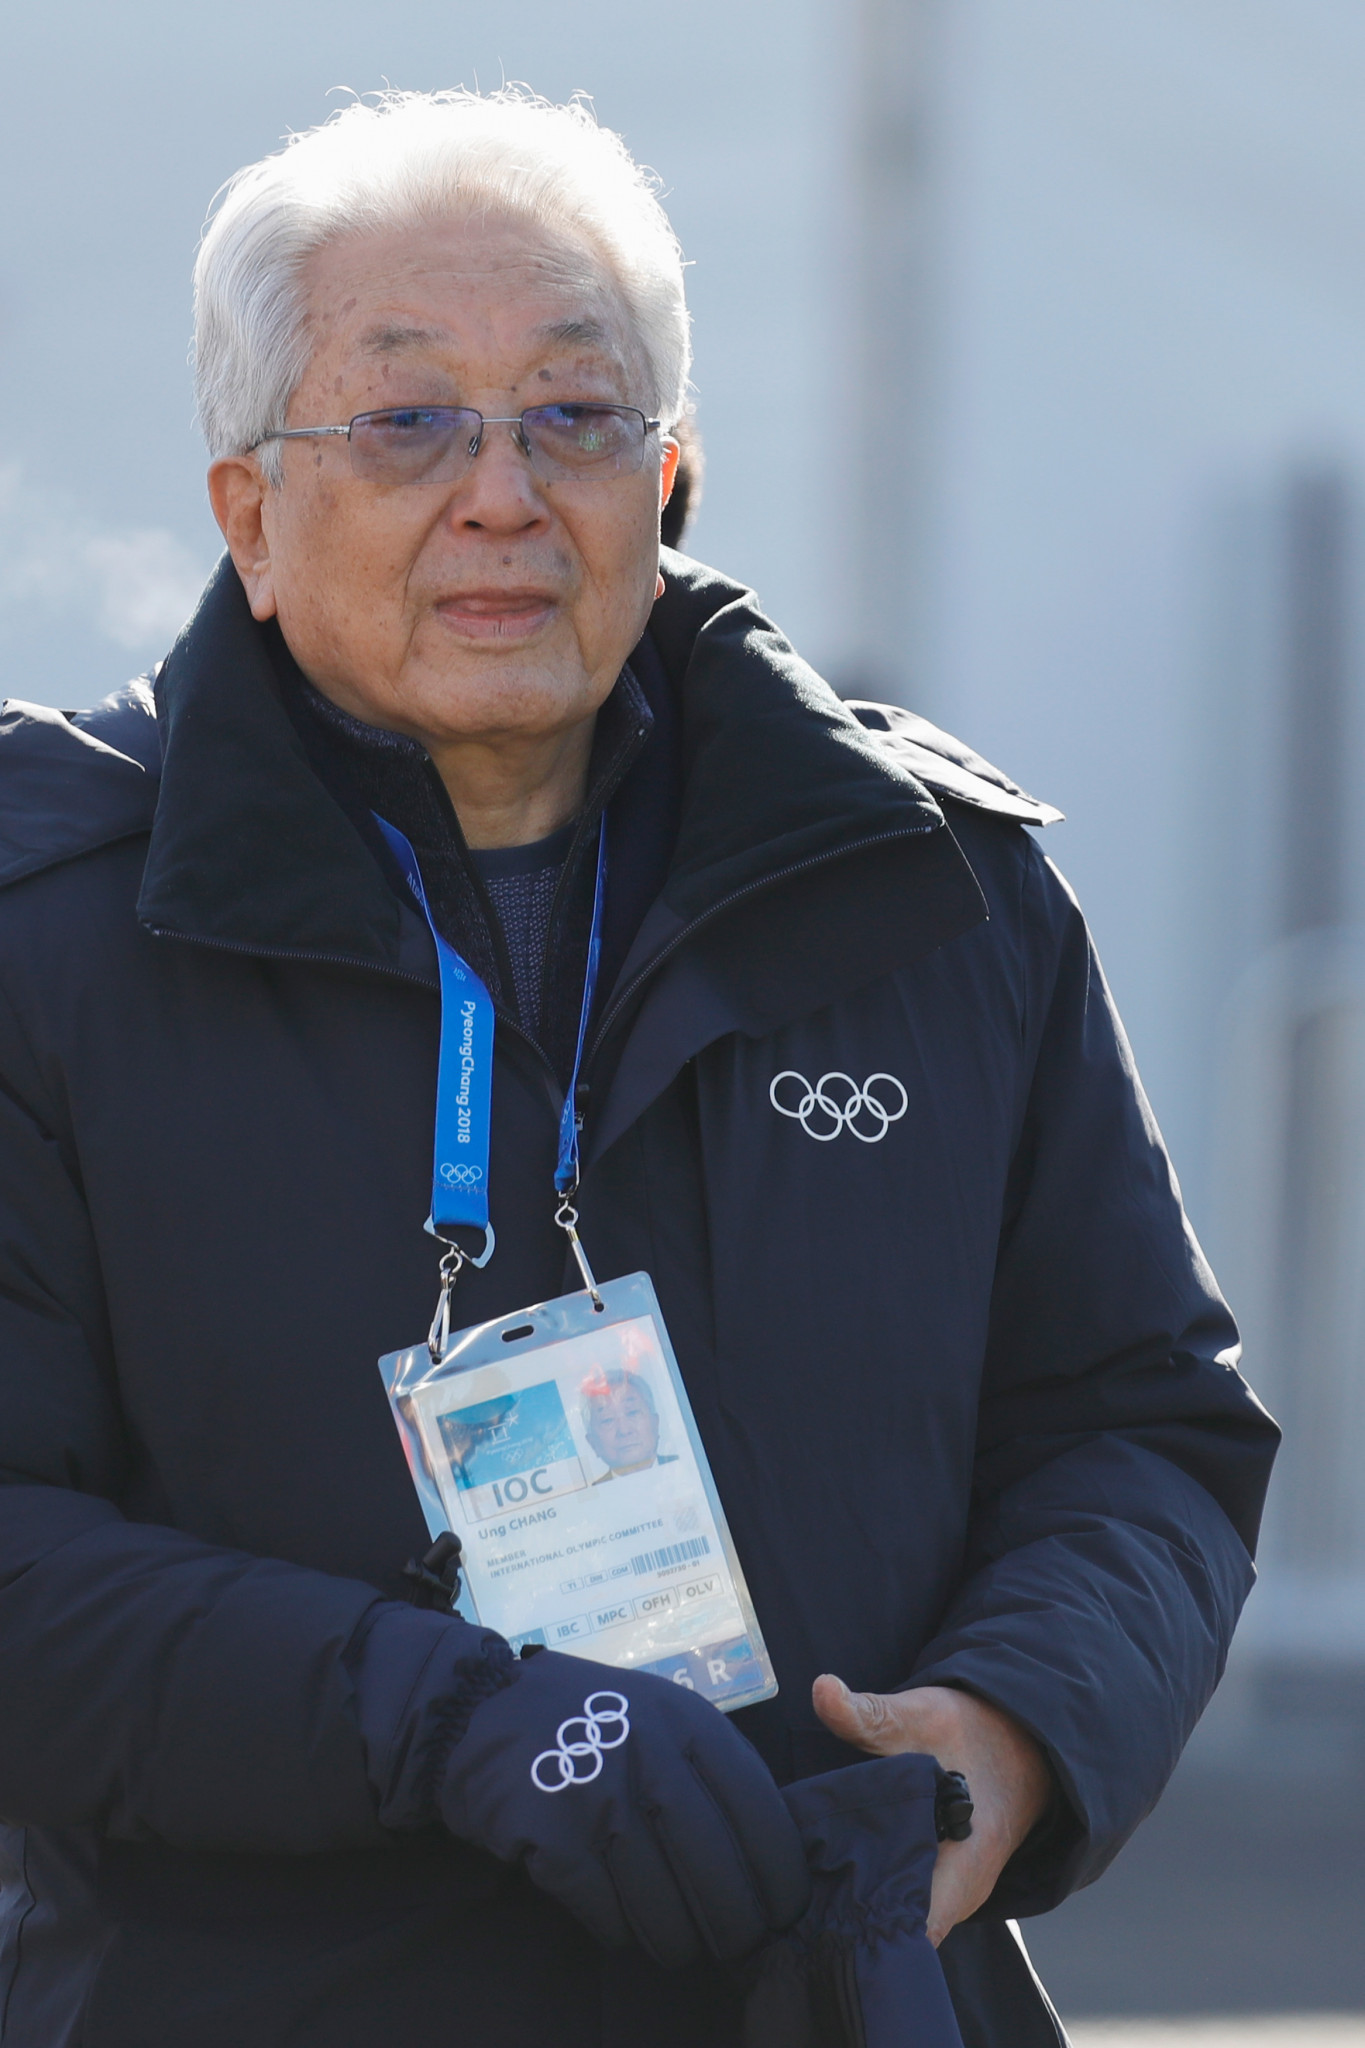 North Korea's Chang Ung ceased his IOC membership in 2018 after reaching the age limit, but is credited with playing a key role in the Korean Unification Flag at Pyeongchang 2018 ©Getty Images